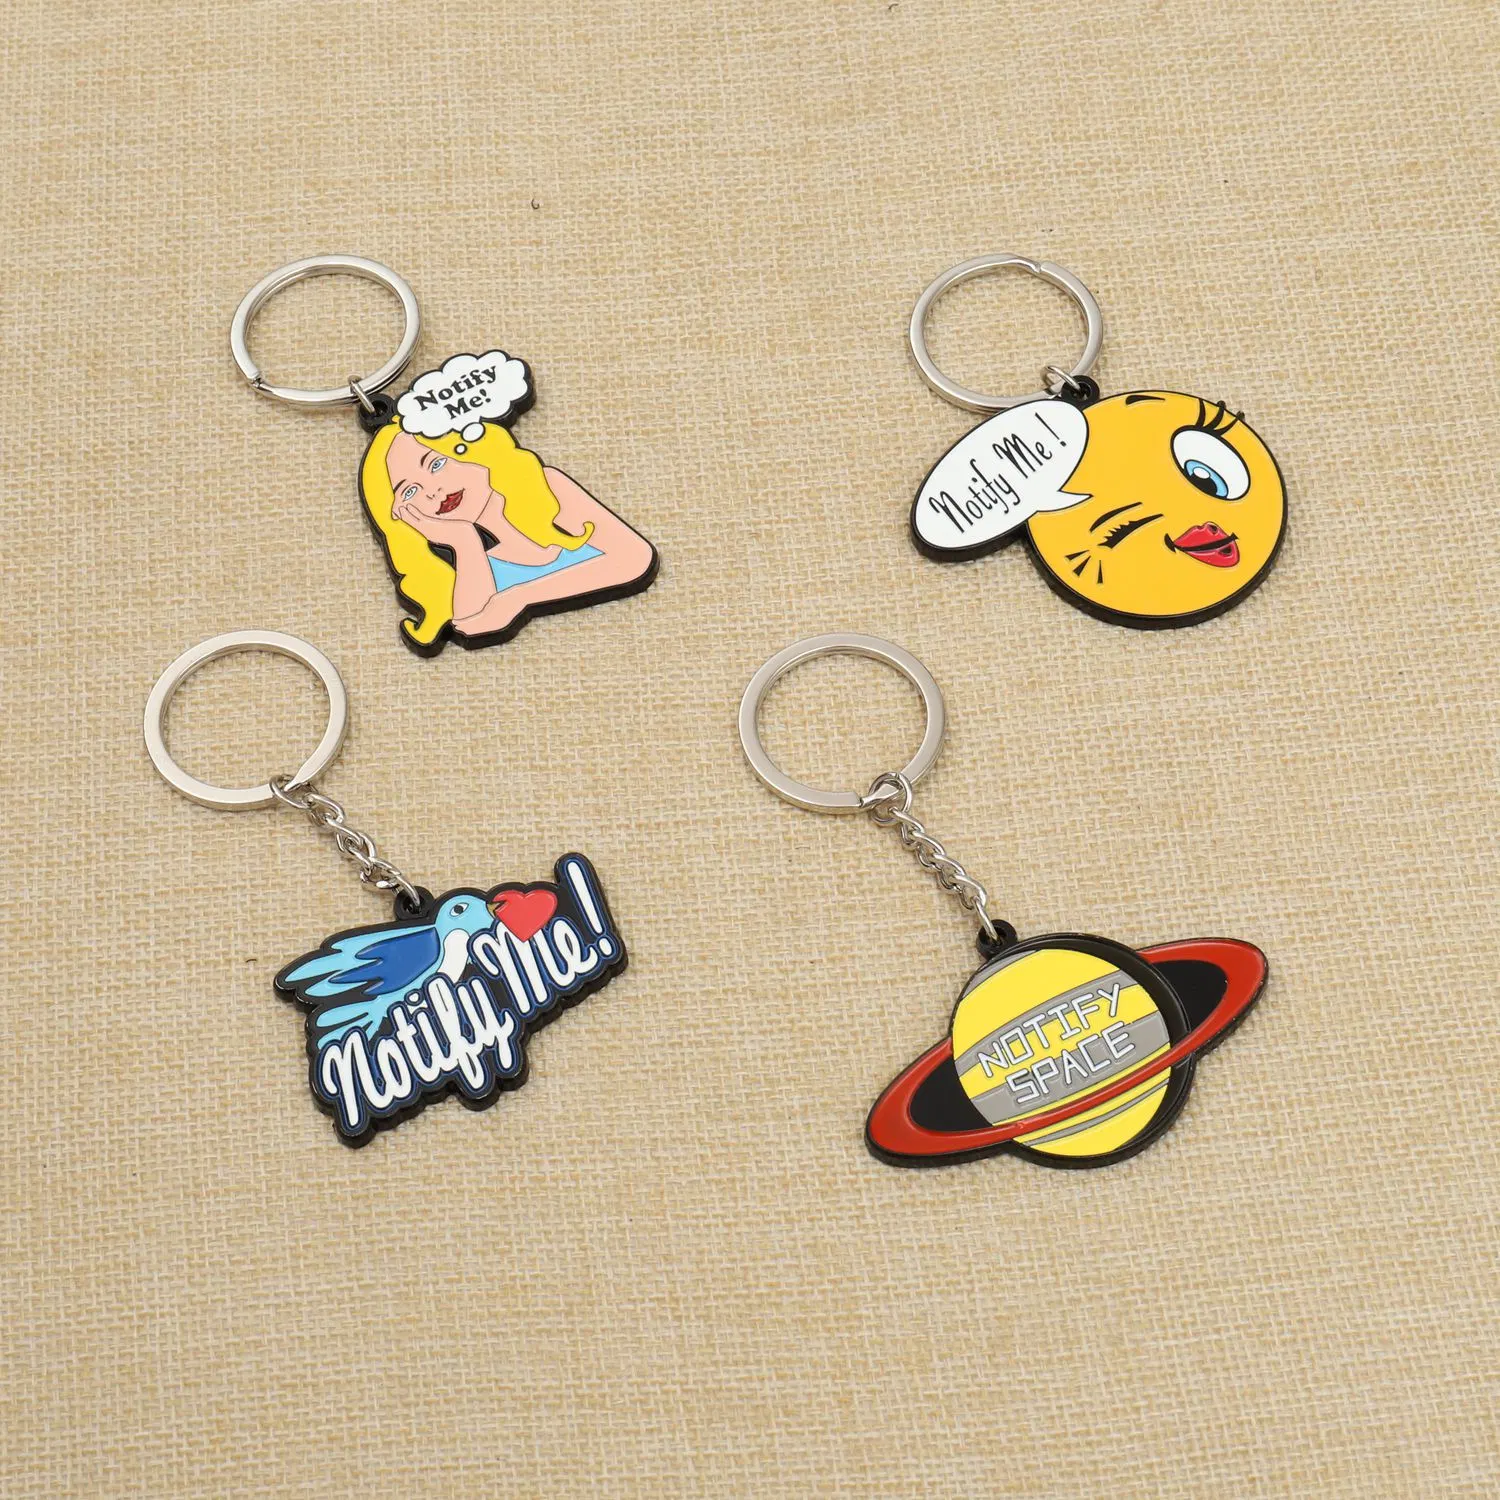 Customized Metal Soft Enamel Promotional Gifts Keychain Key Ring Keyring Key Chain with Spinning